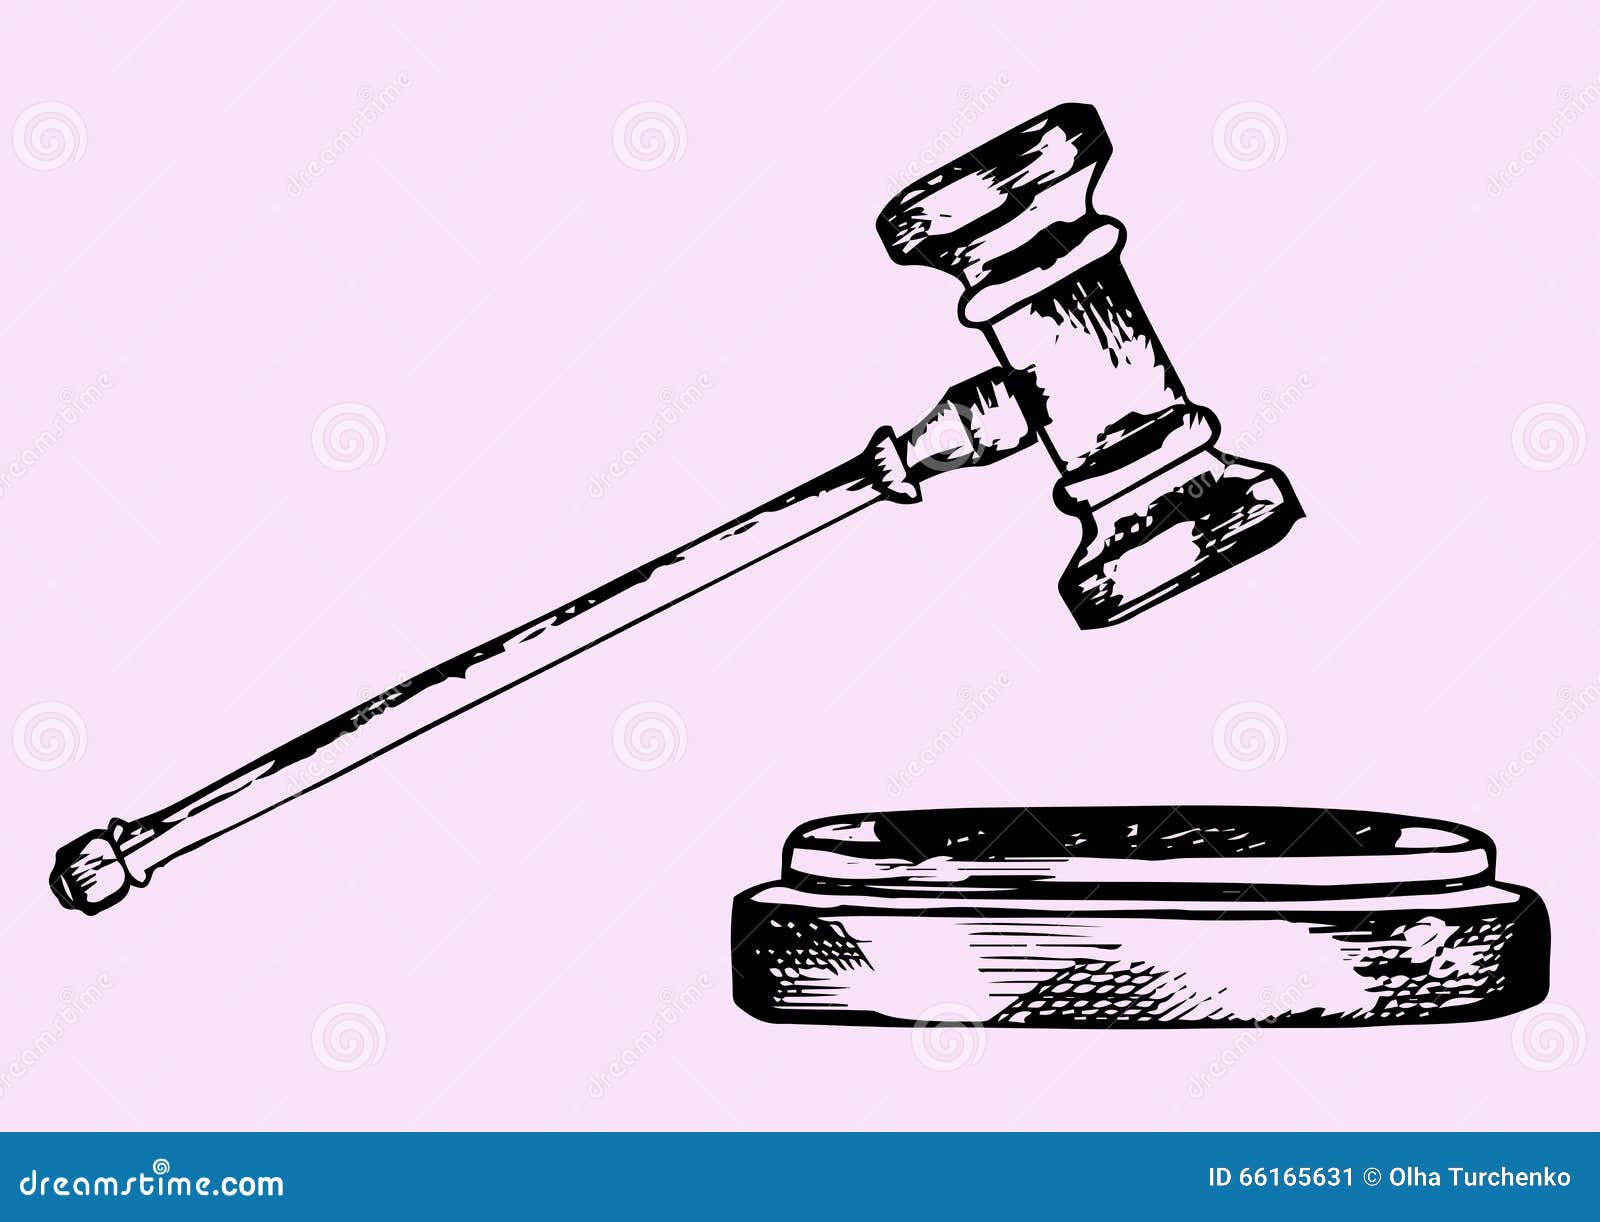 Learn How to Draw Judges Gavel Everyday Objects Step by Step  Drawing  Tutorials